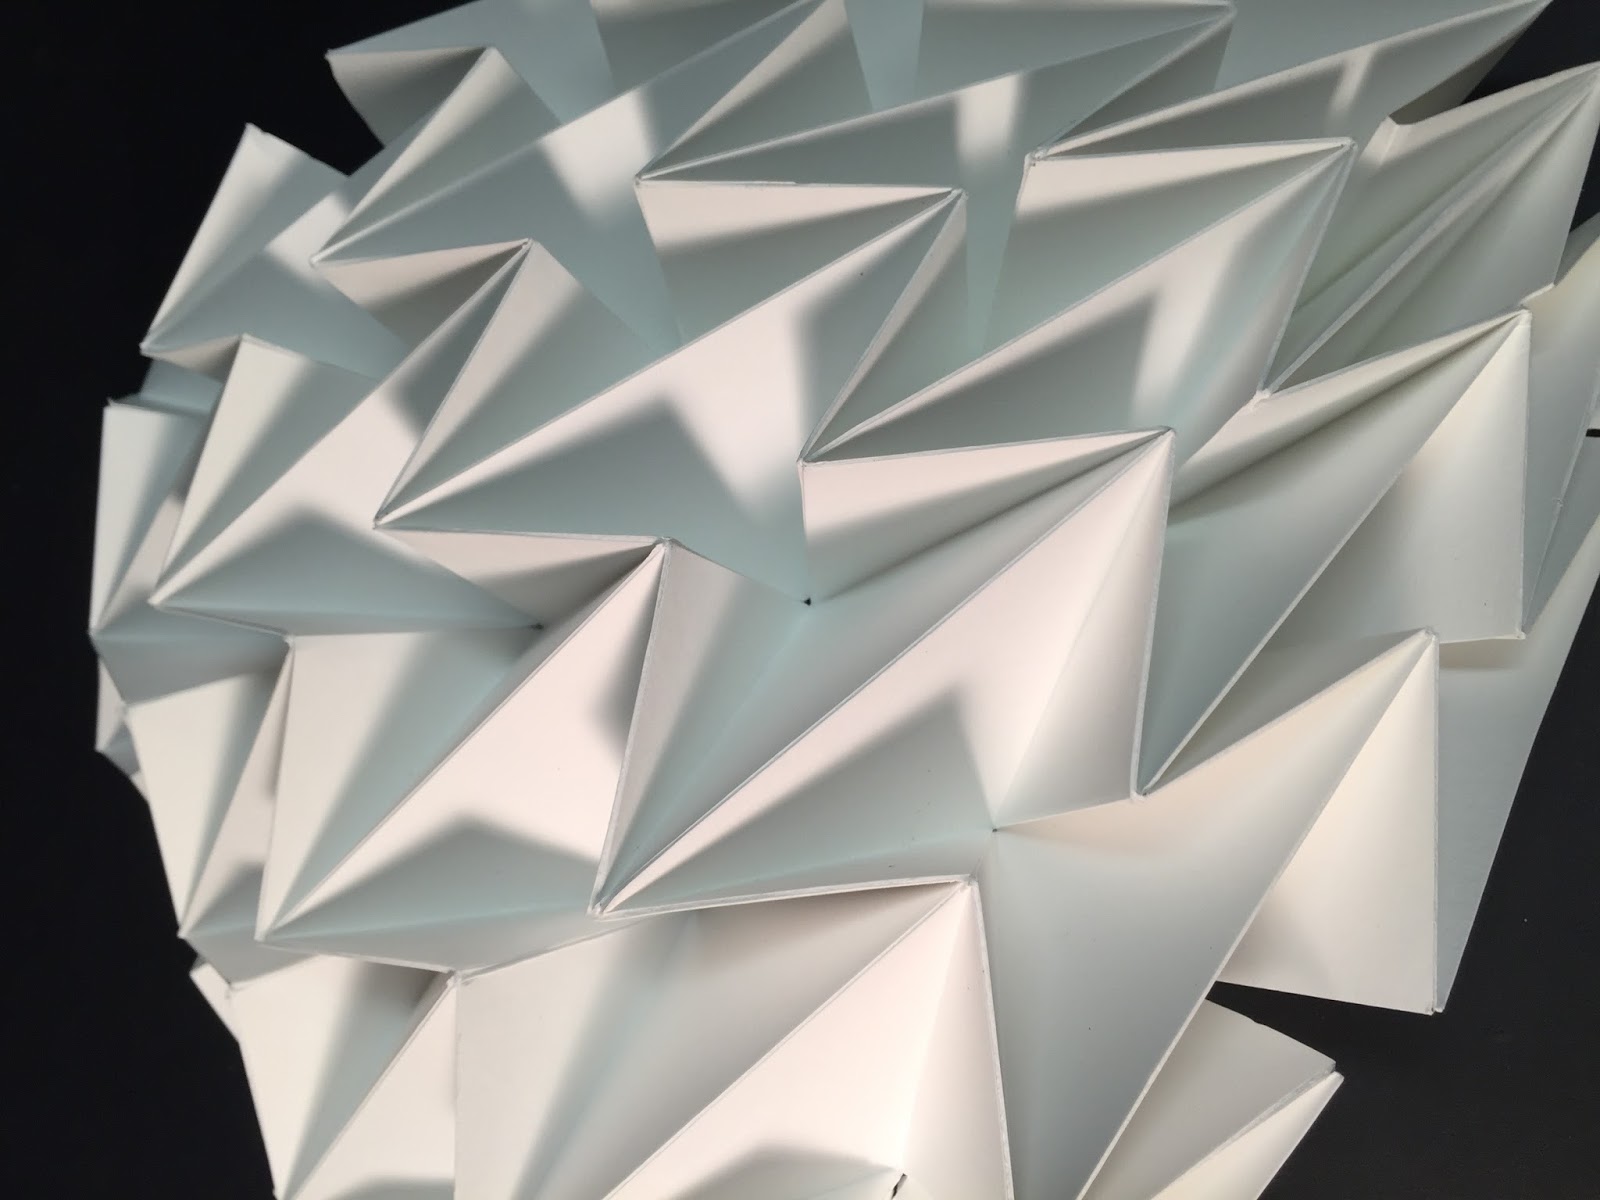 Paper Folding Study - If Walls Could Dream